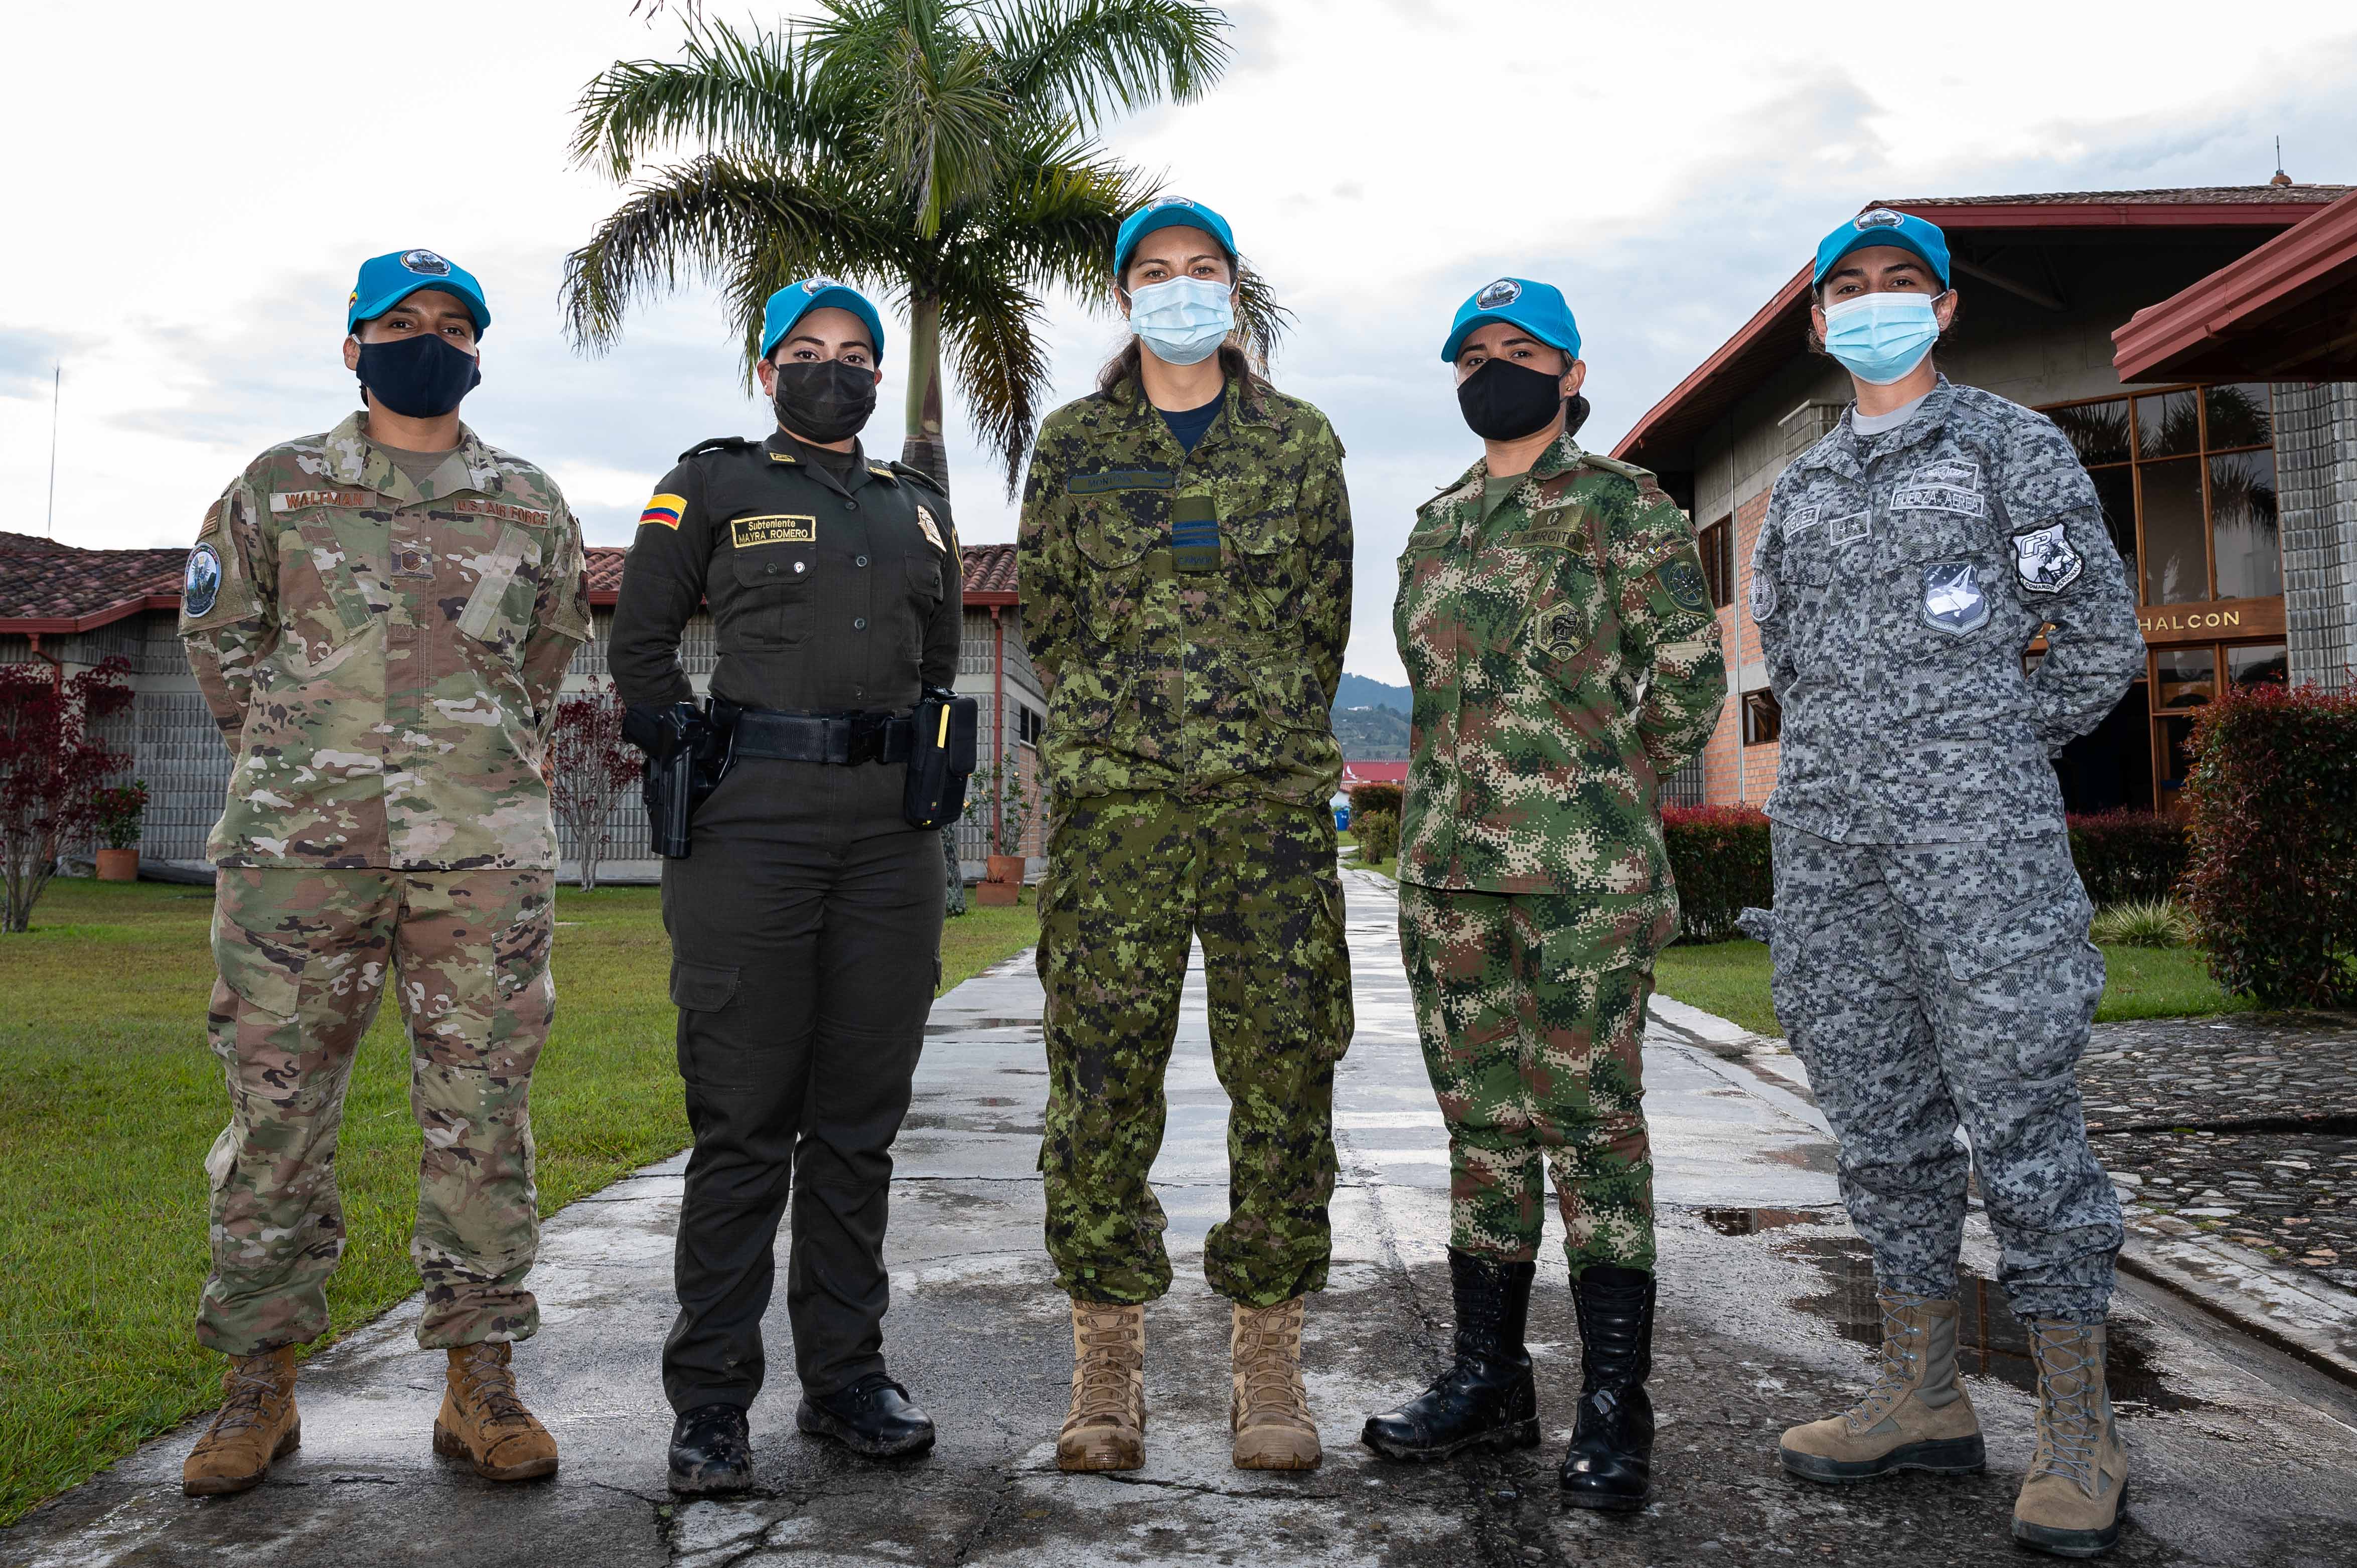 U.S., Canadian and Colombian collaboration during Exercise COOPERACION VII at Arturo Lema Posada Air Base in Colombia on 6 September 2021. PHOTO: Corporal Dominic Duchesne-Beaulieu